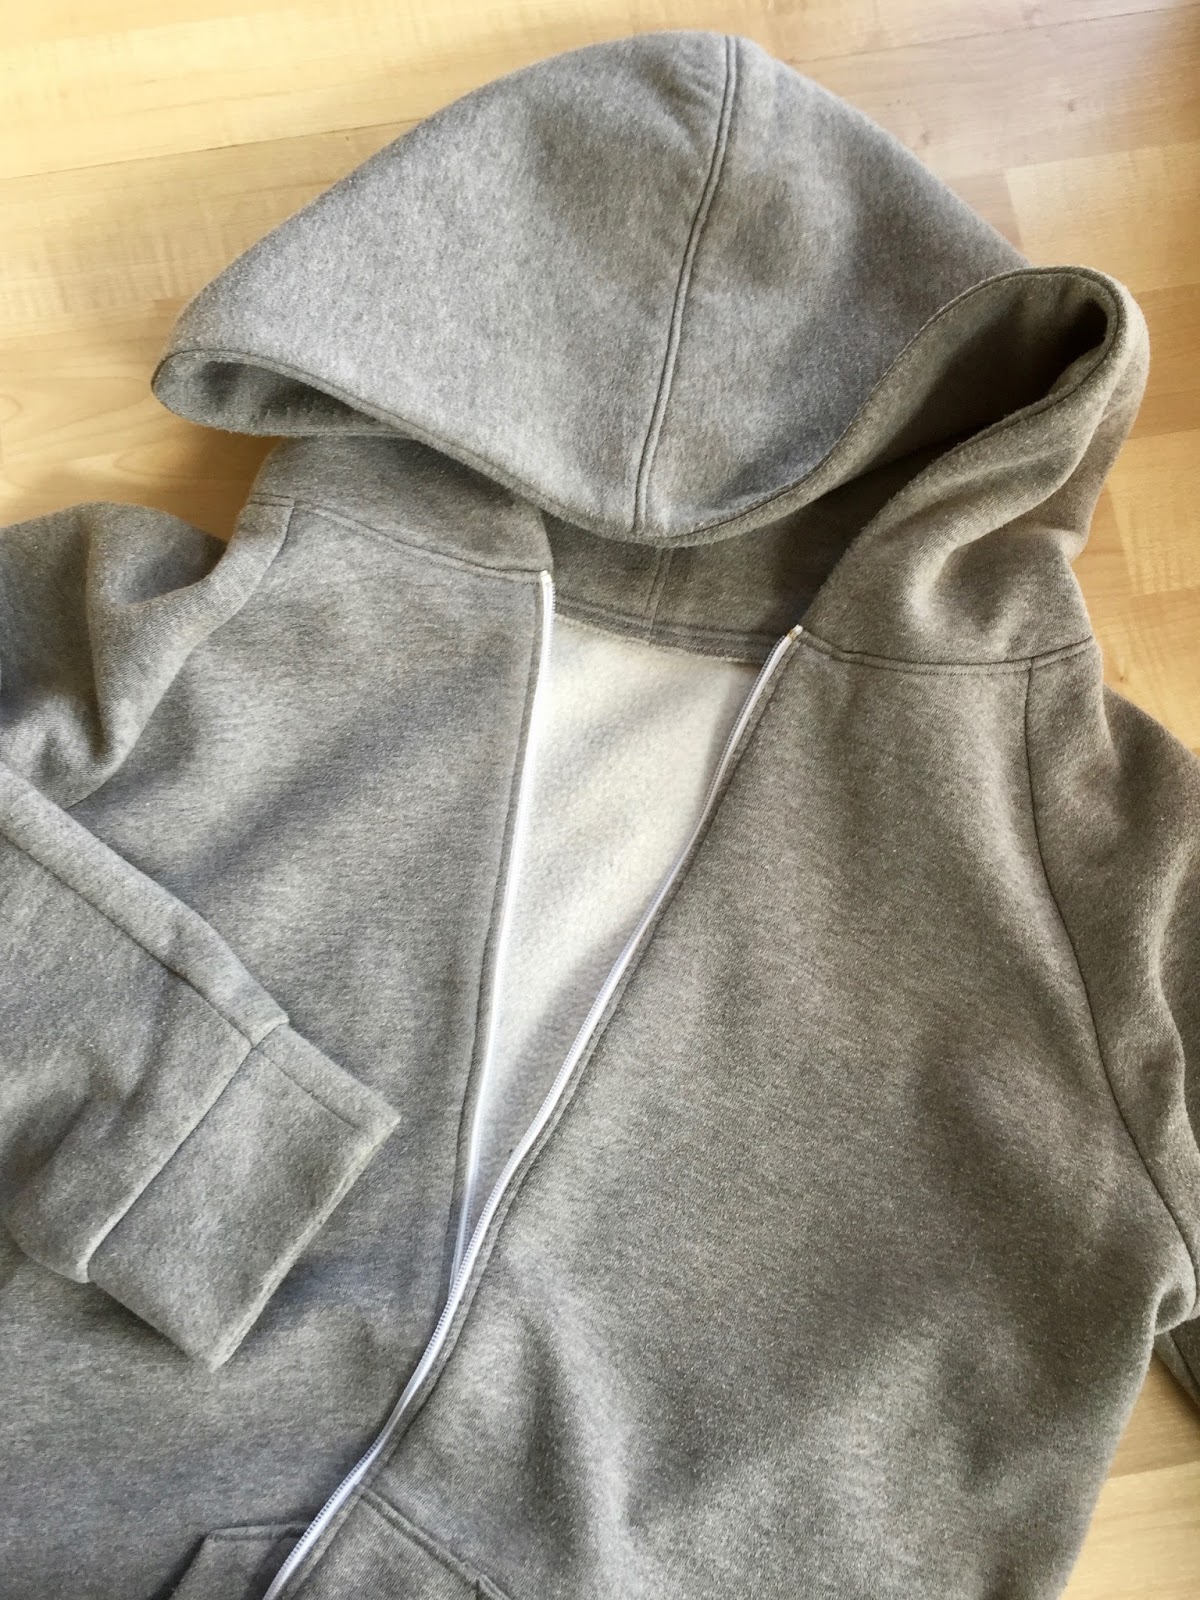 Diary of a Chain Stitcher : Handmade Gifts: McCalls 6614 Hoodies for Men